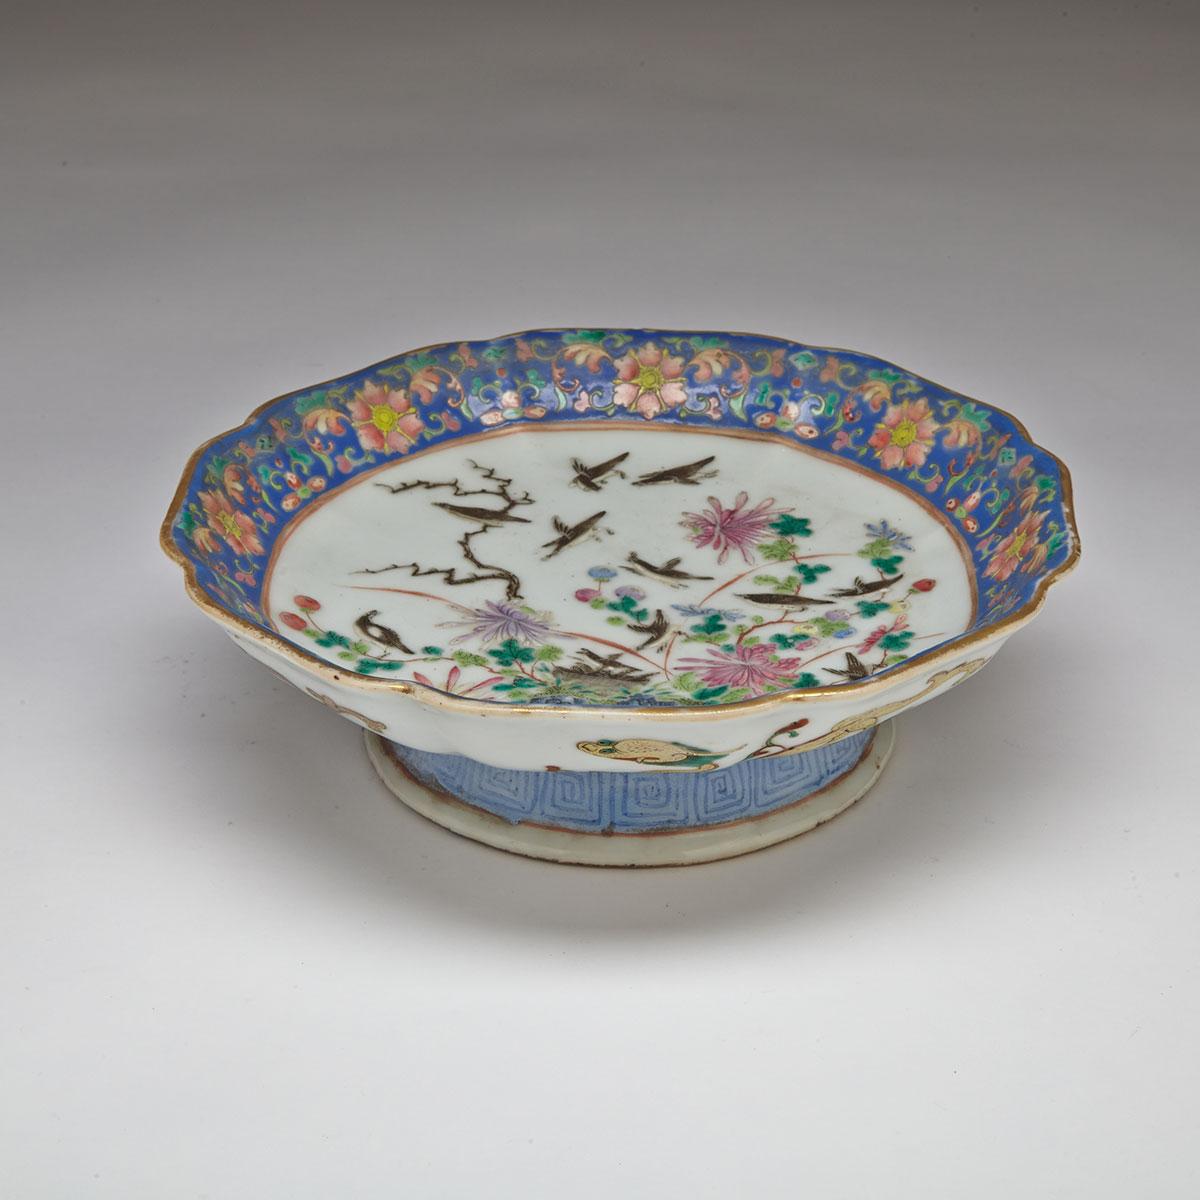 Famille Rose Footed ‘Magpie’ Bowl, Tongzhi Mark and Period (1862-1874)